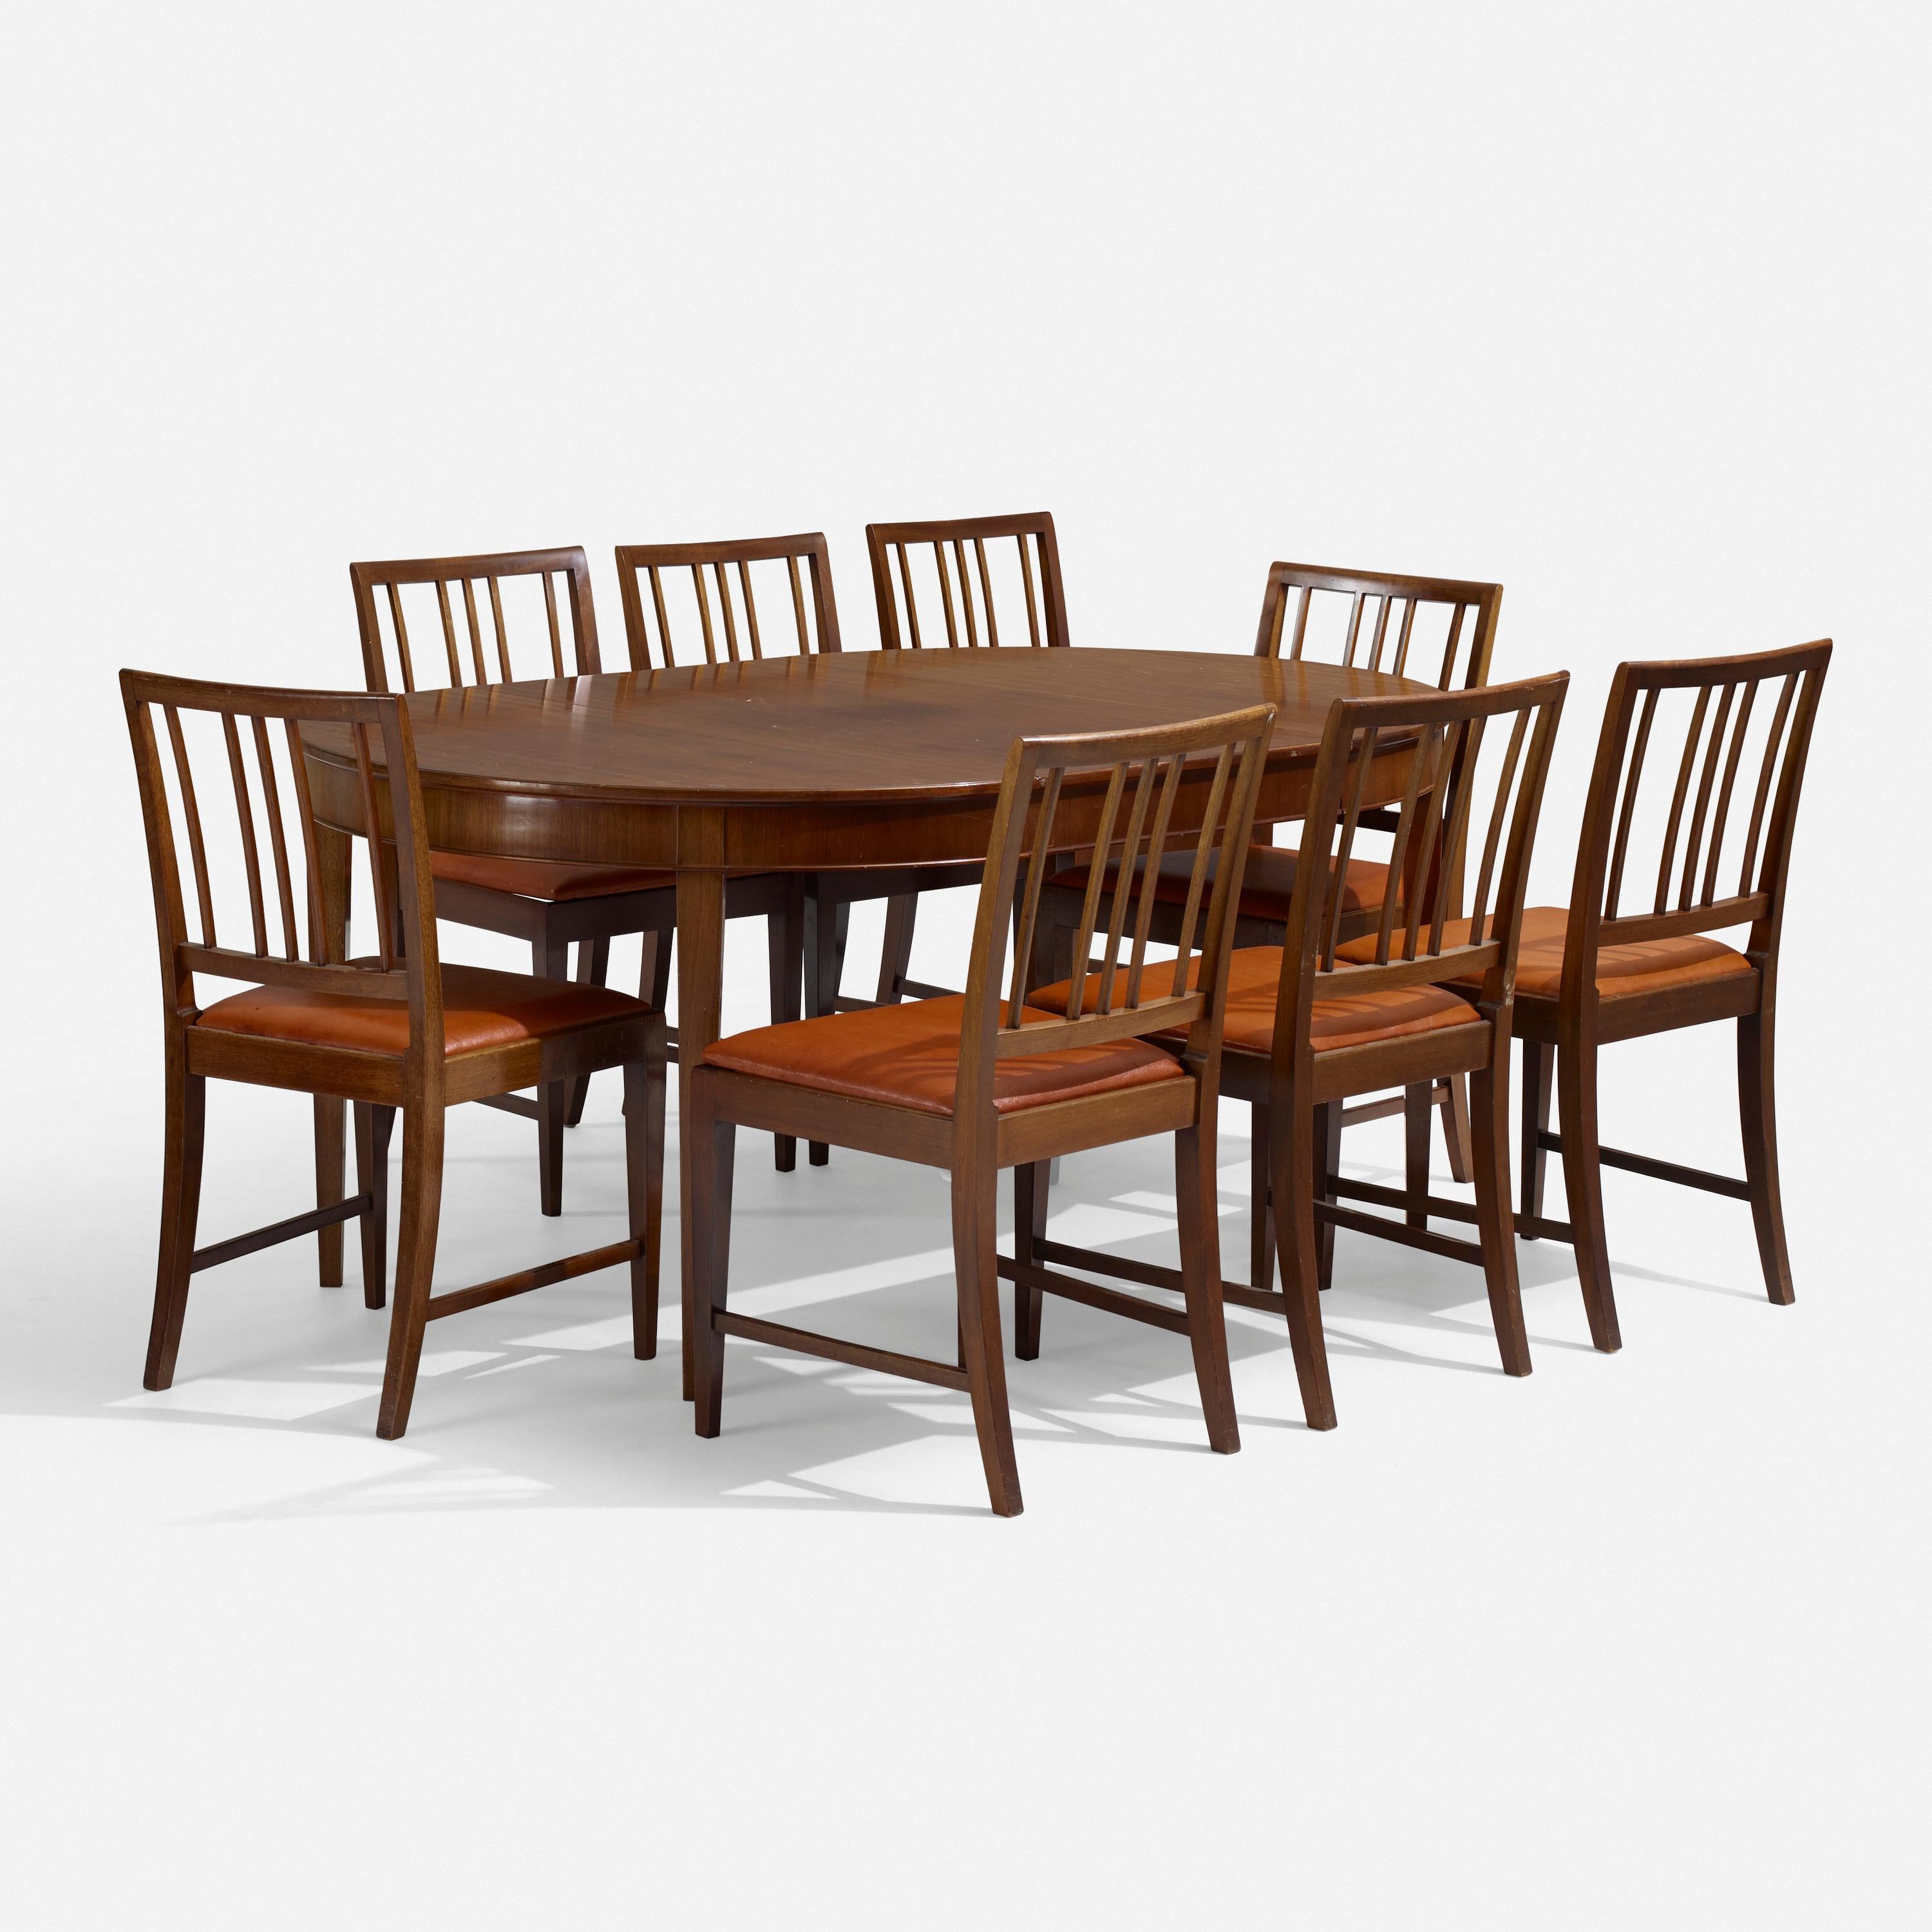 Leather Frits Henningsen Danish Modern Dining Chairs, circa 1930s For Sale